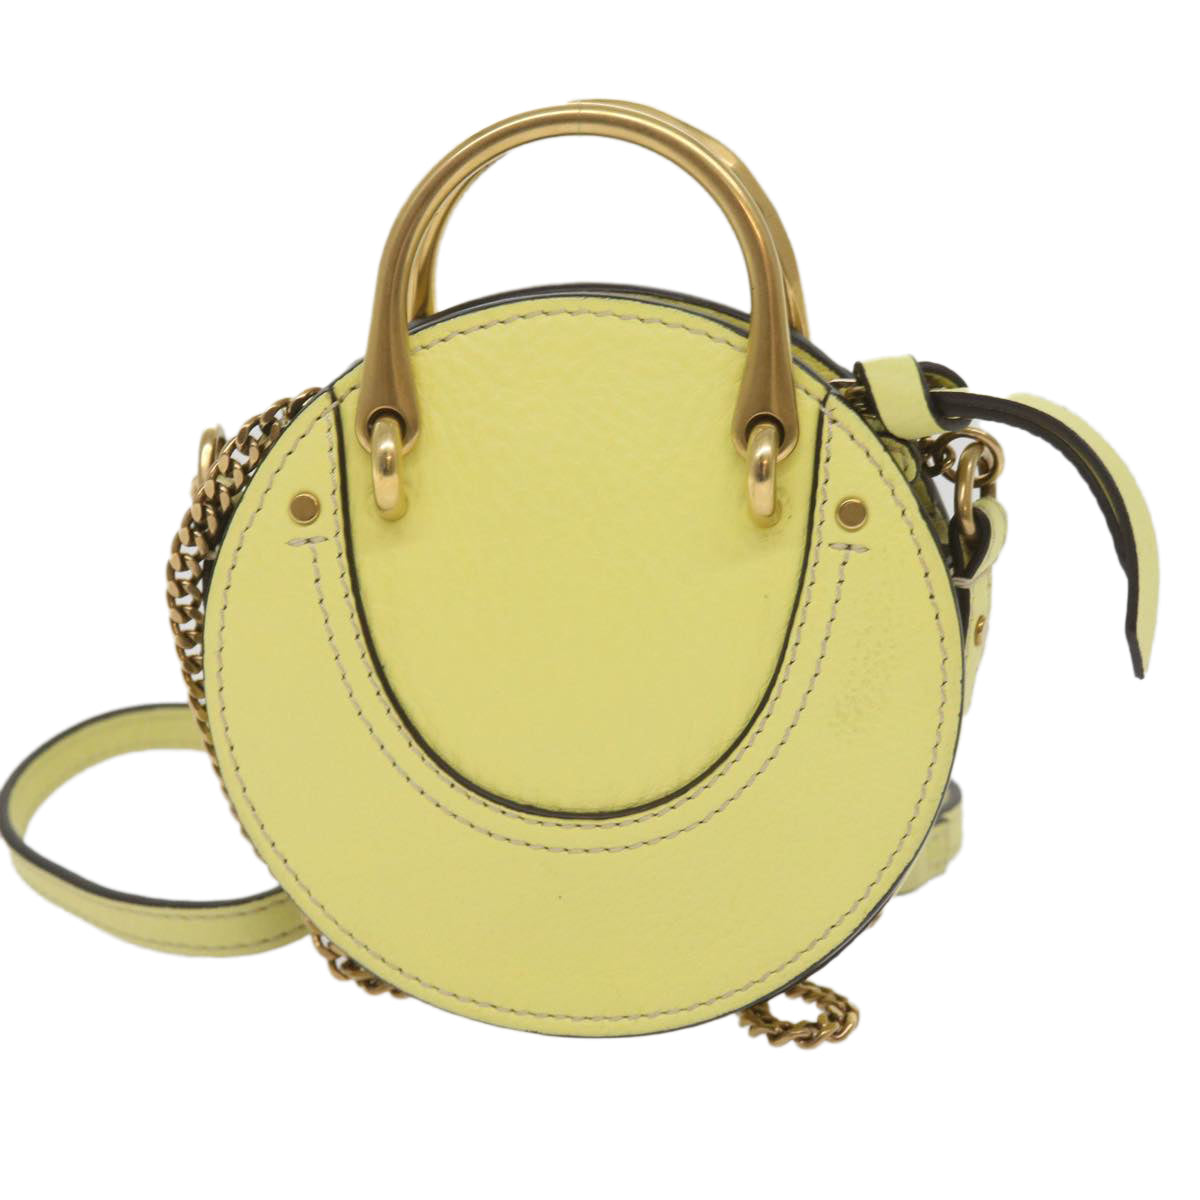 Chloe Pixy Hand Bag Suede Leather 2way Yellow Auth 65664 - 0